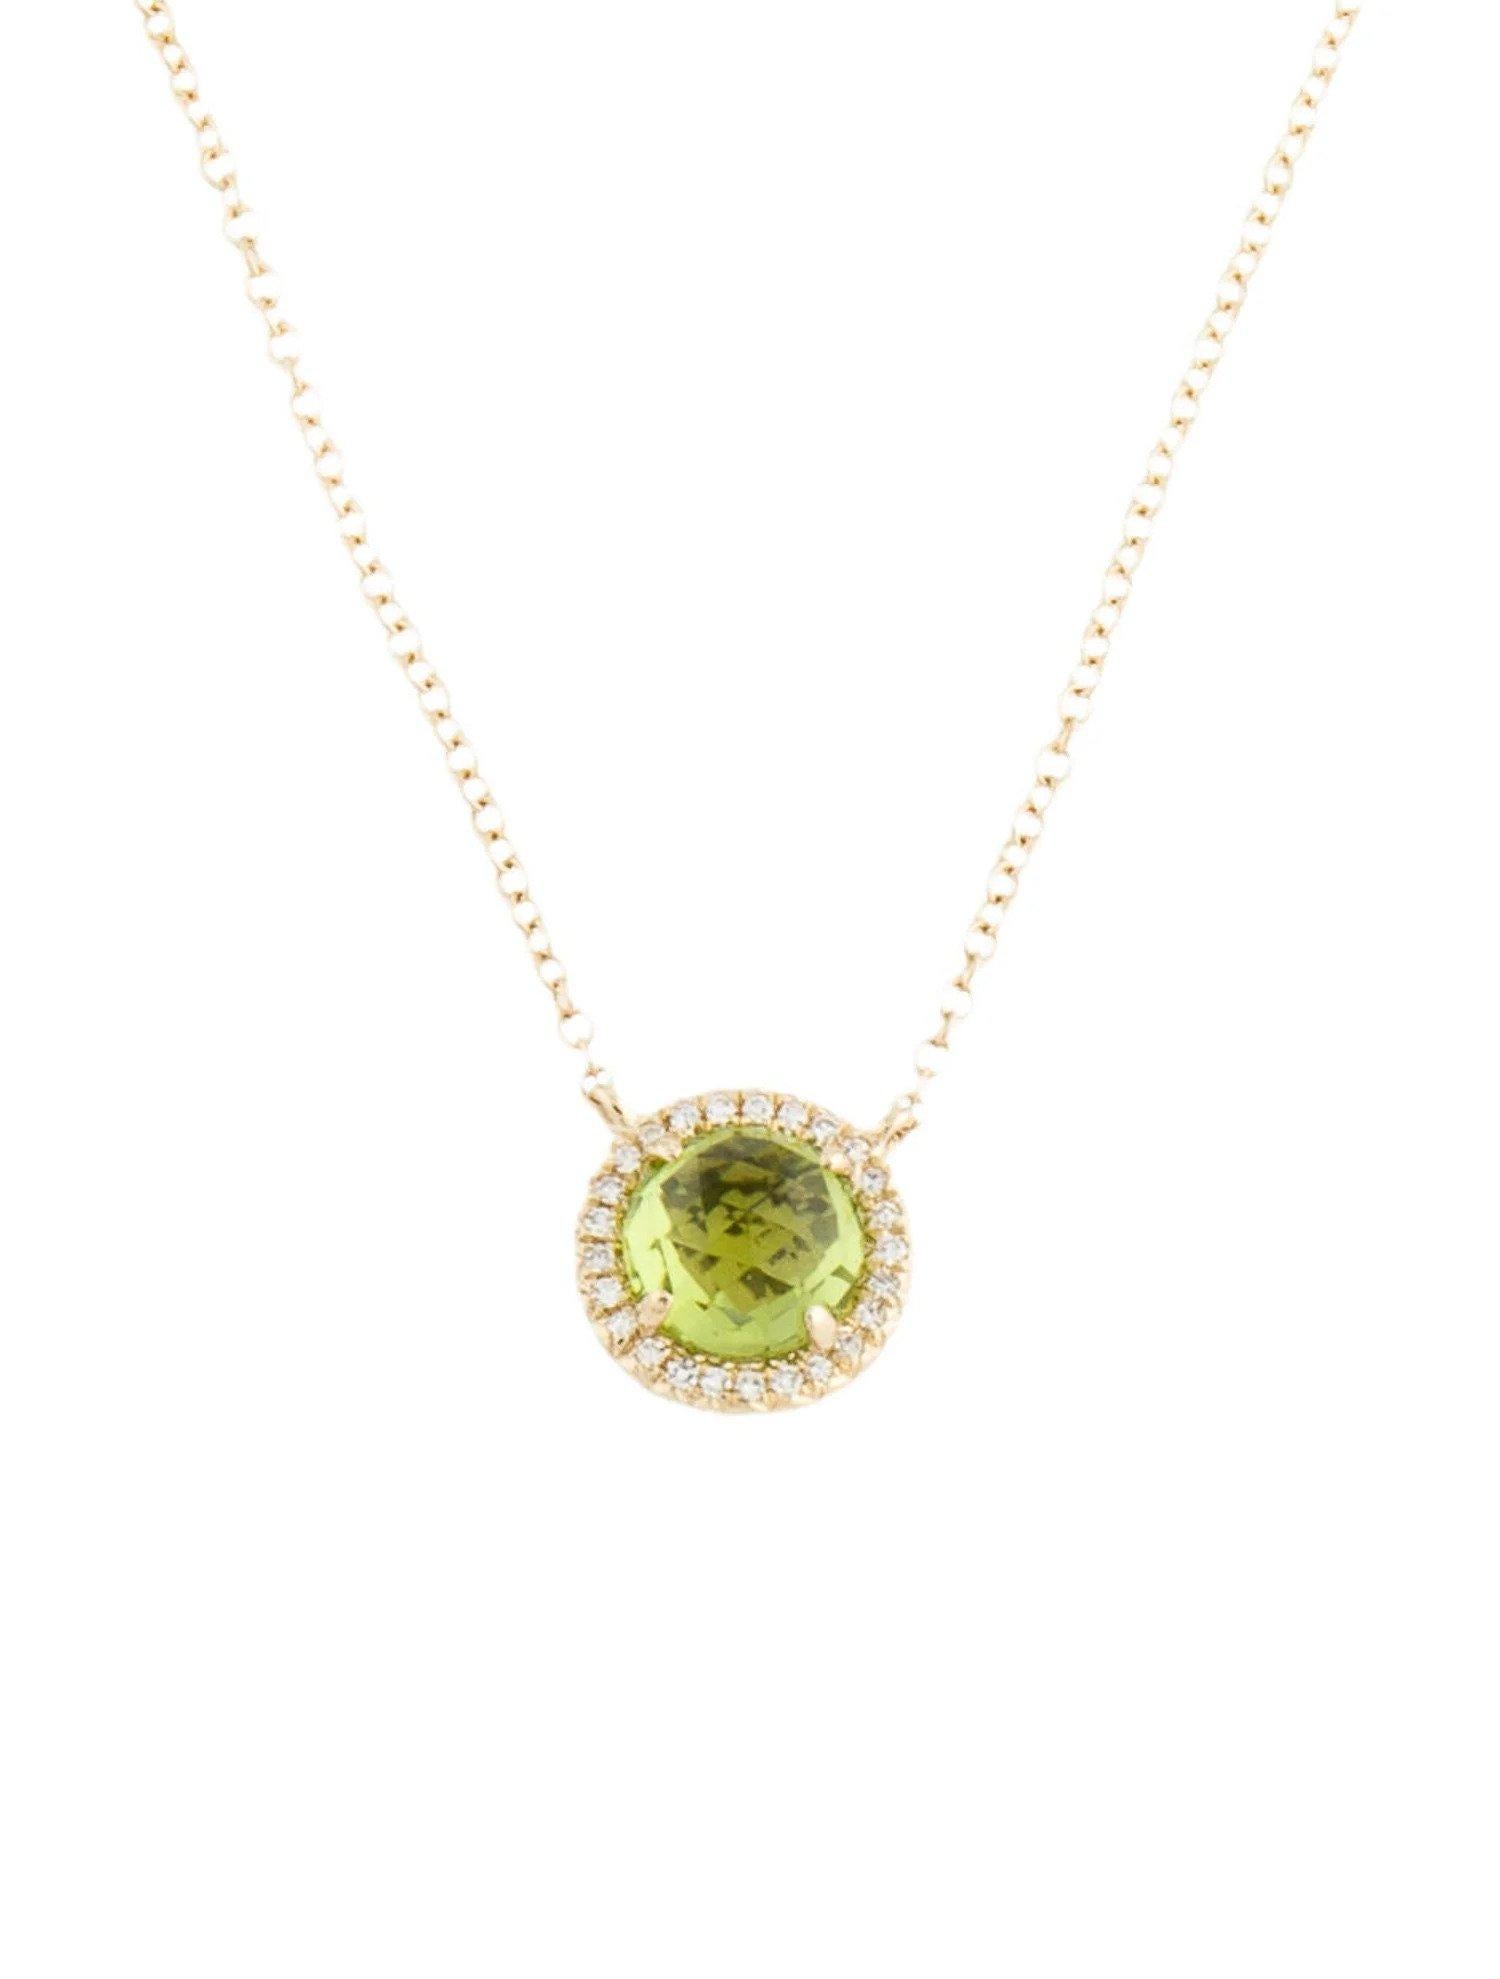 1.20 Carat Round Peridot & Diamond Yellow Gold Pendant Necklace  In New Condition For Sale In Great Neck, NY